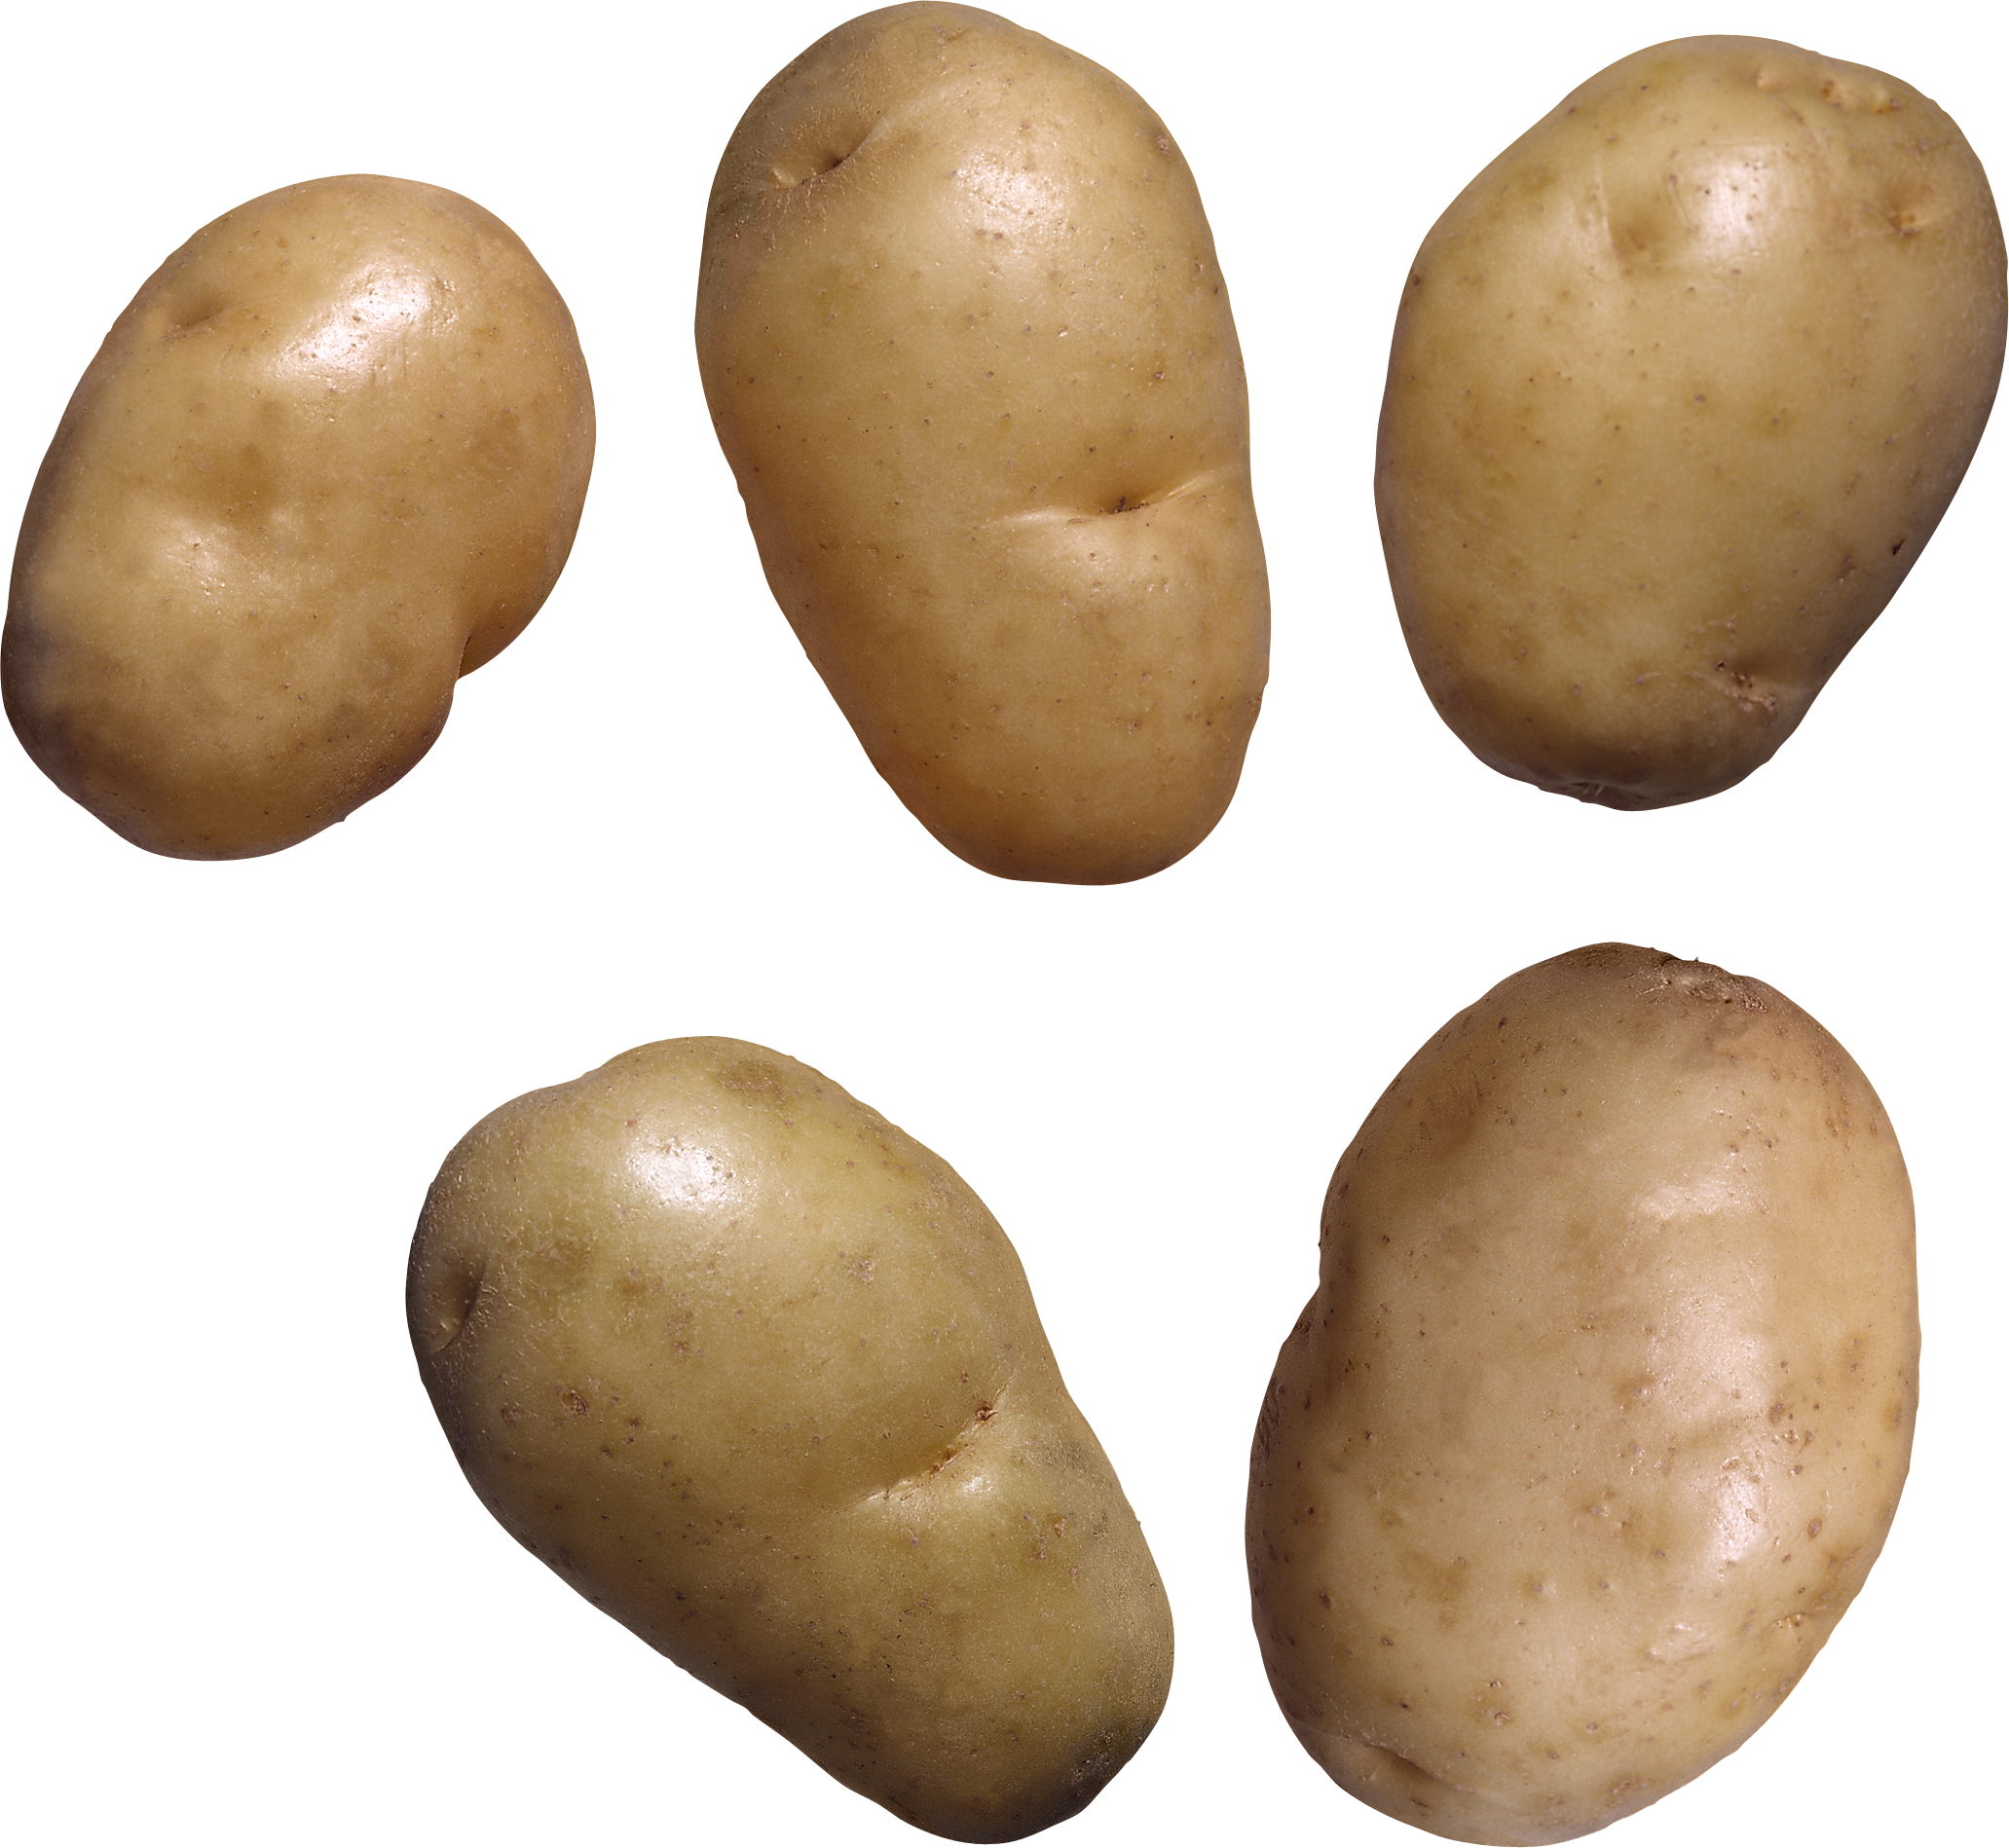 Potato PNG images, pictures, free download